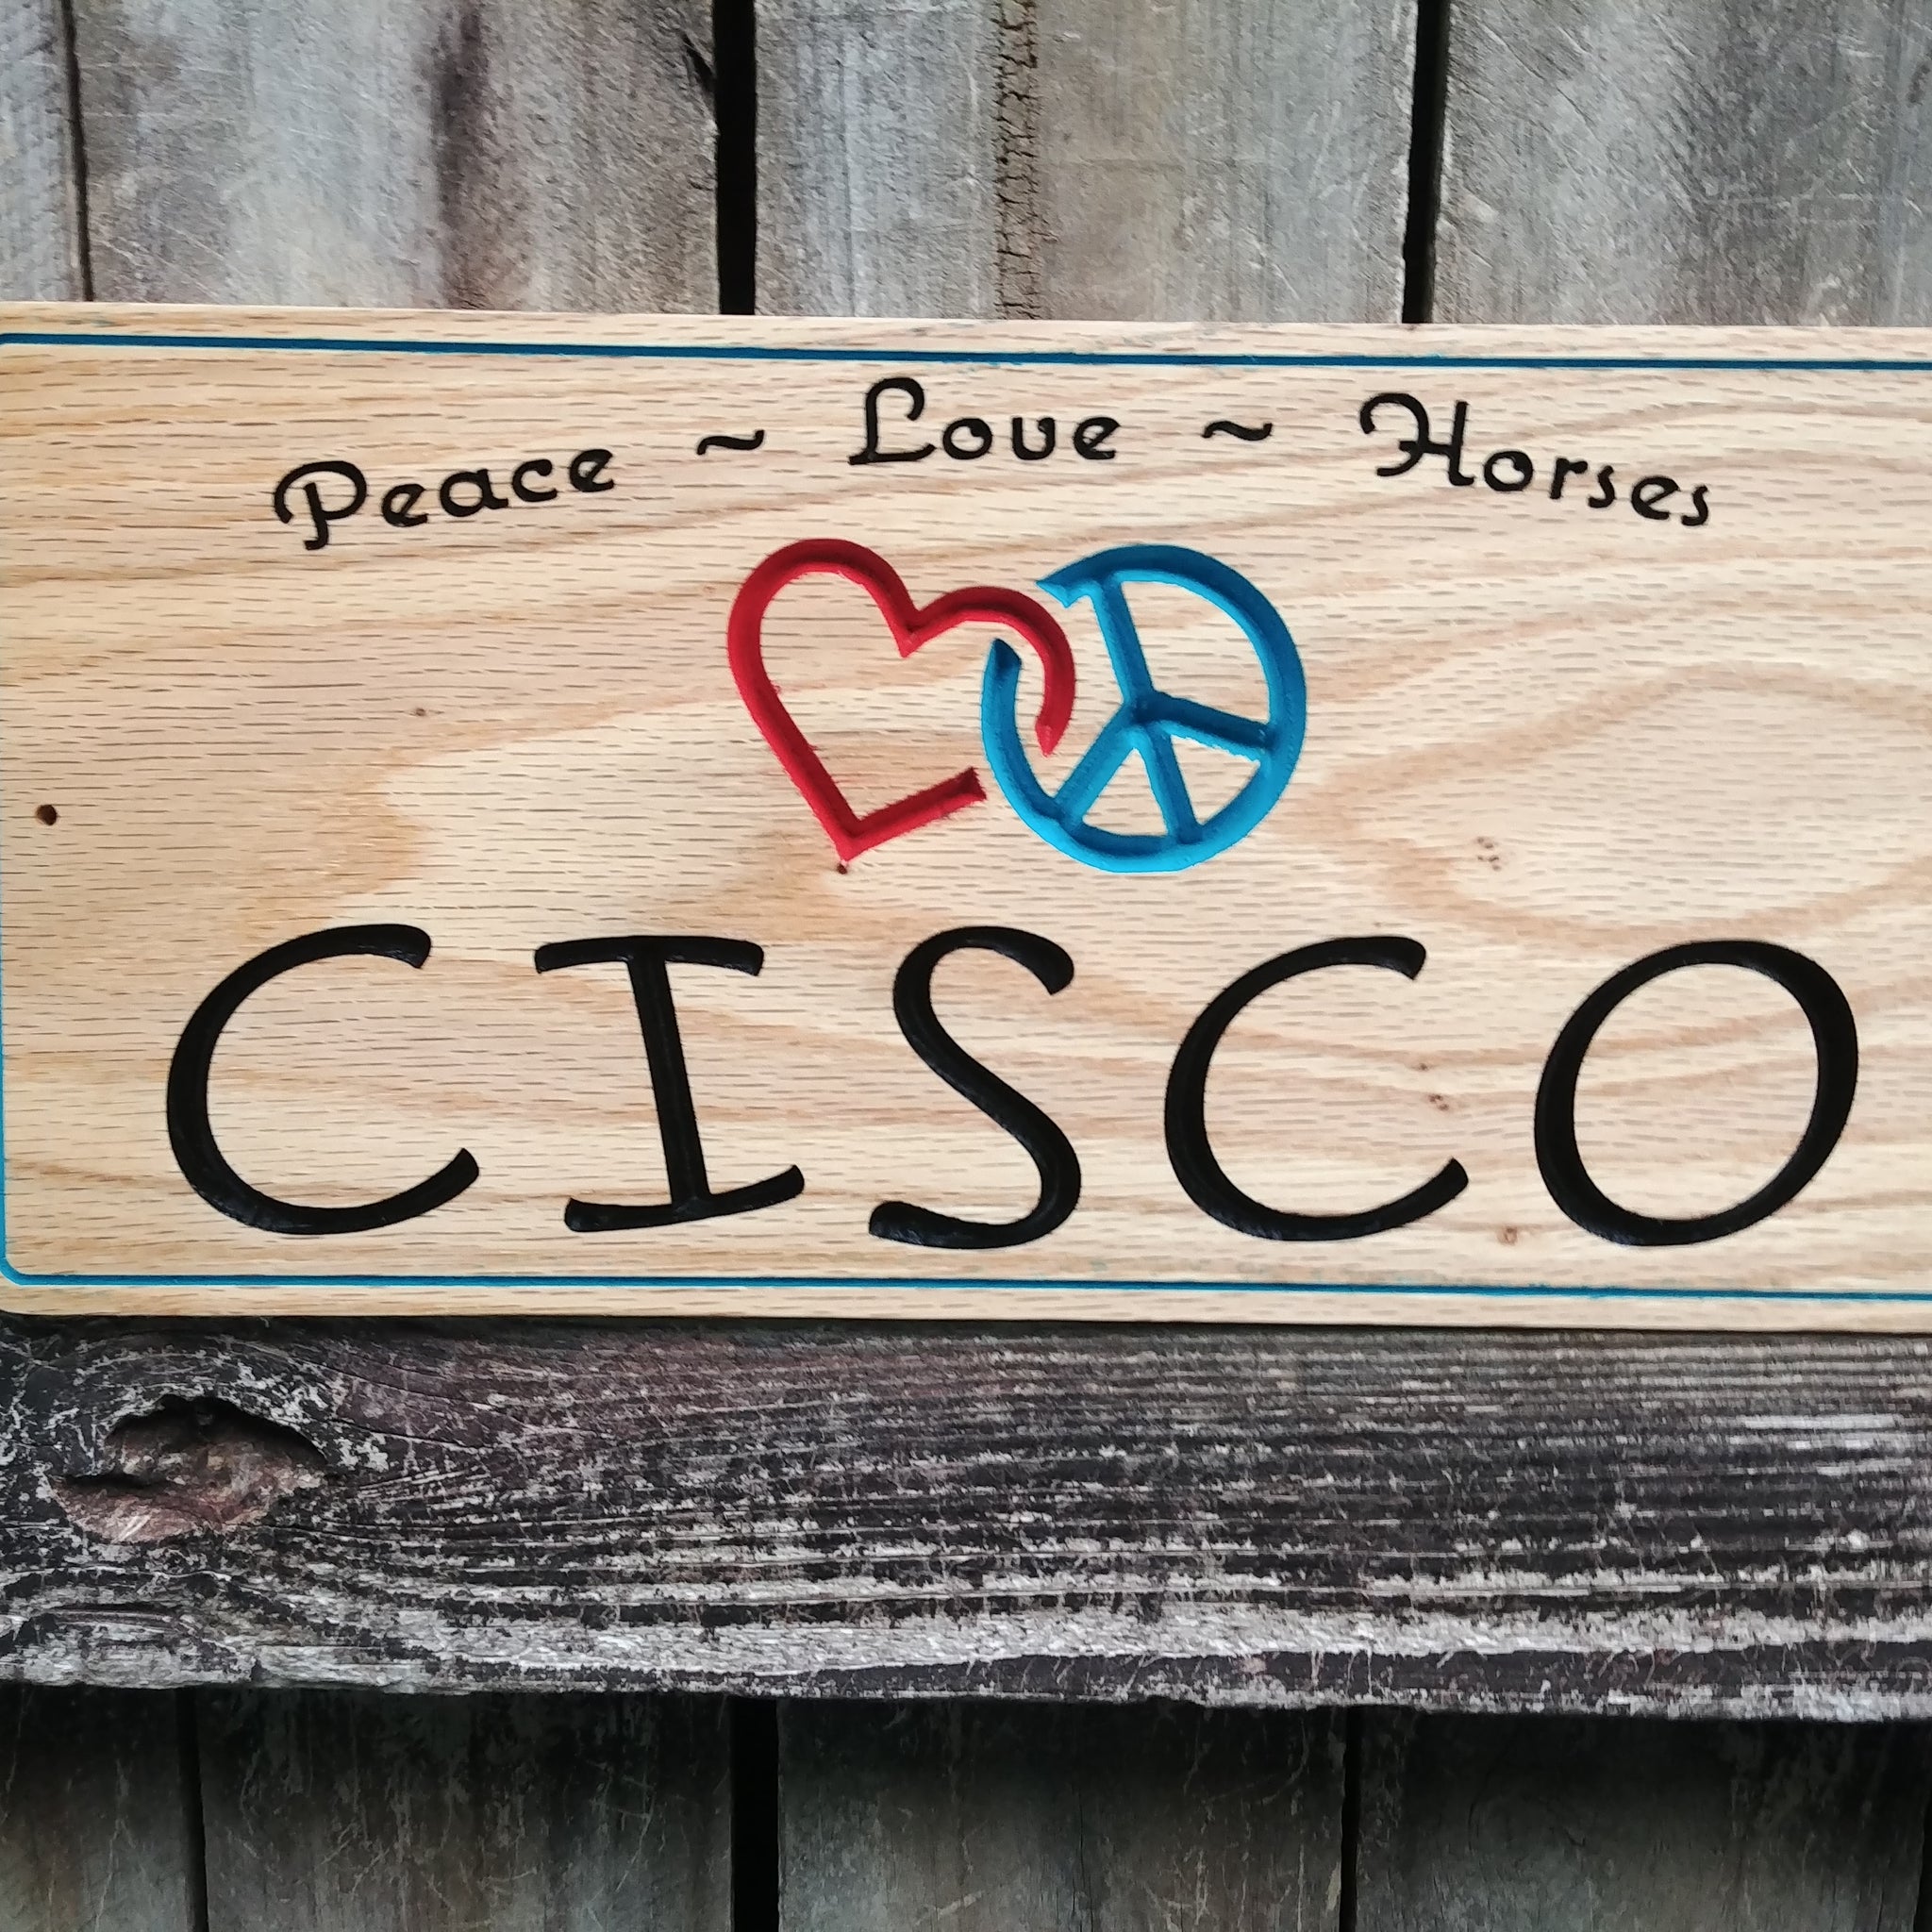 This is a personalized solid Red Oak Horse stall sign. Custom made signage with Horse name in a whimsical font, an interlocking red heart and blue peace sign and the words peace-love-horses at the top. All text is v-carved into the solid wood and painted.